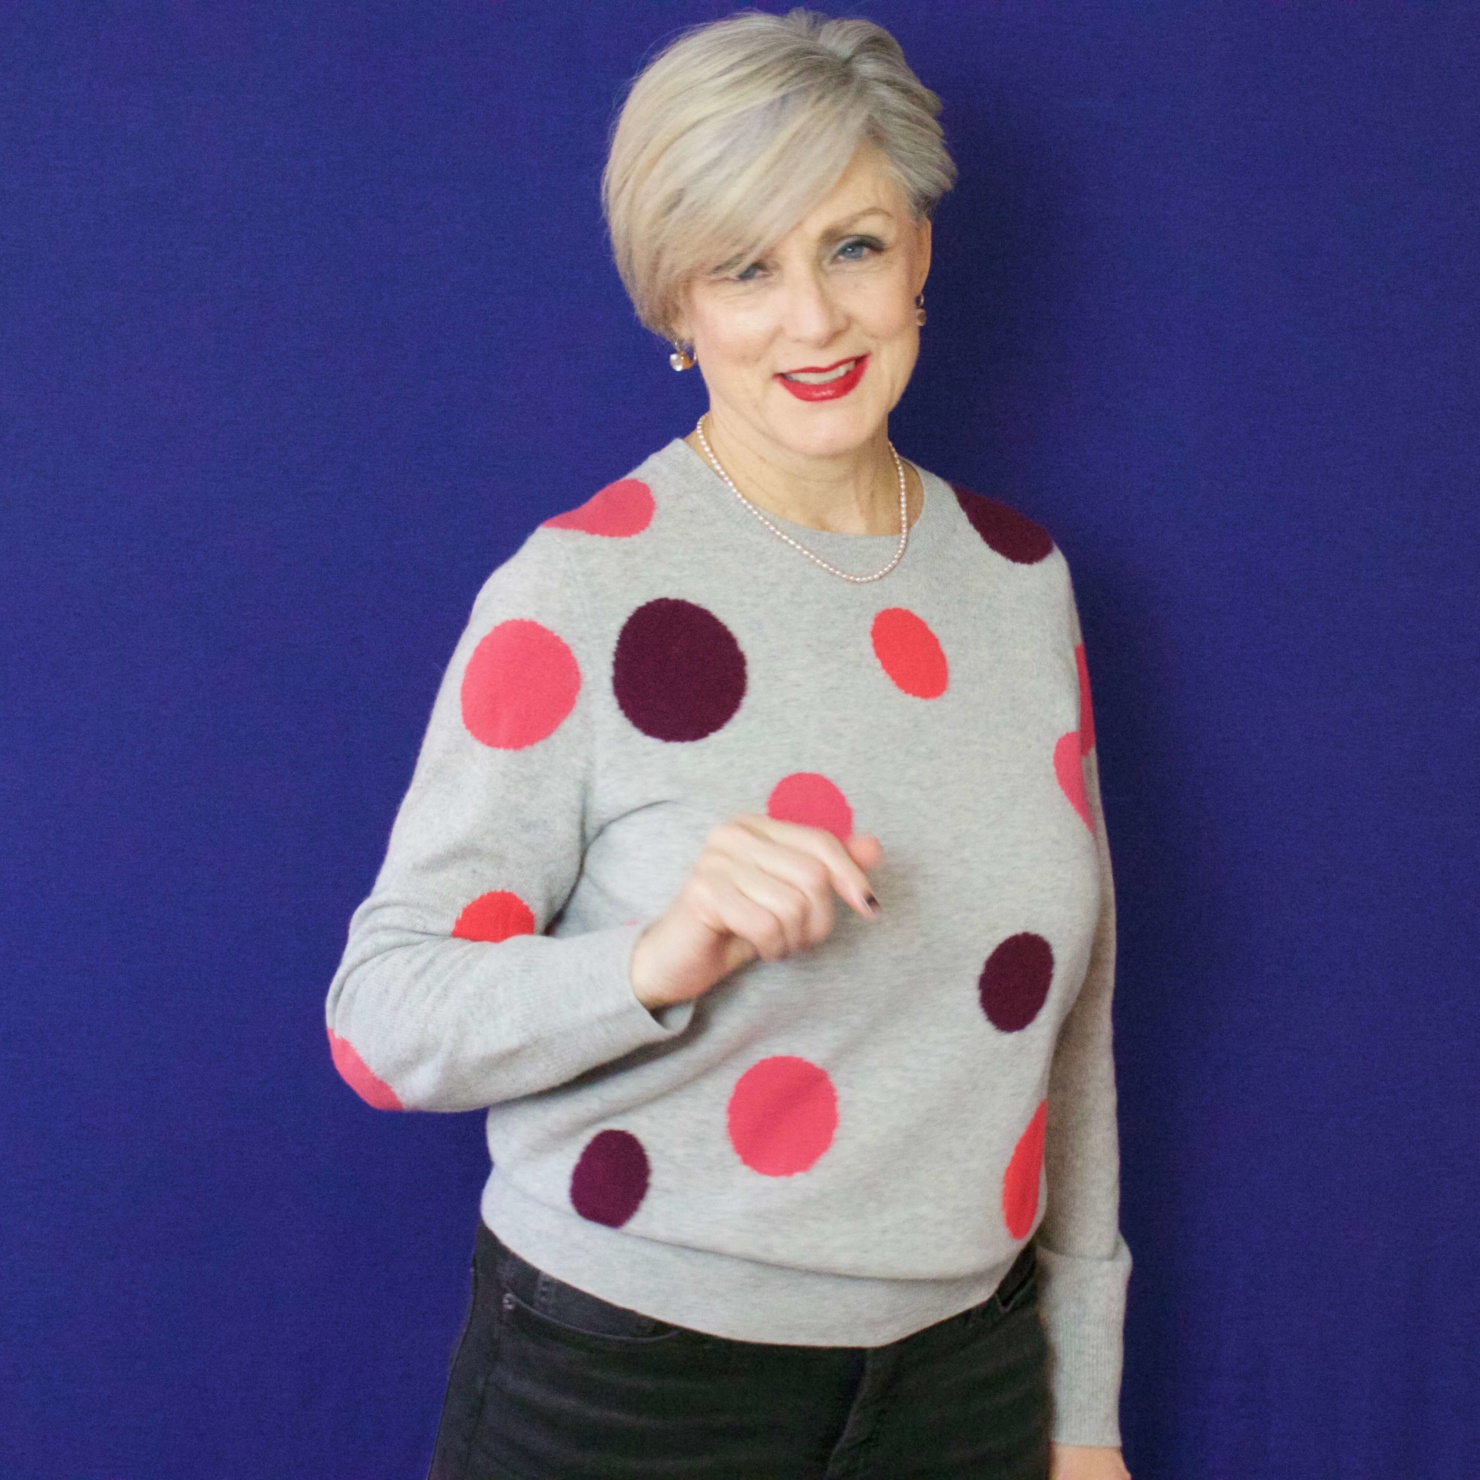 beth from Style at a Certain Age wears a polka dot cashmere sweater from Marks & Spencer